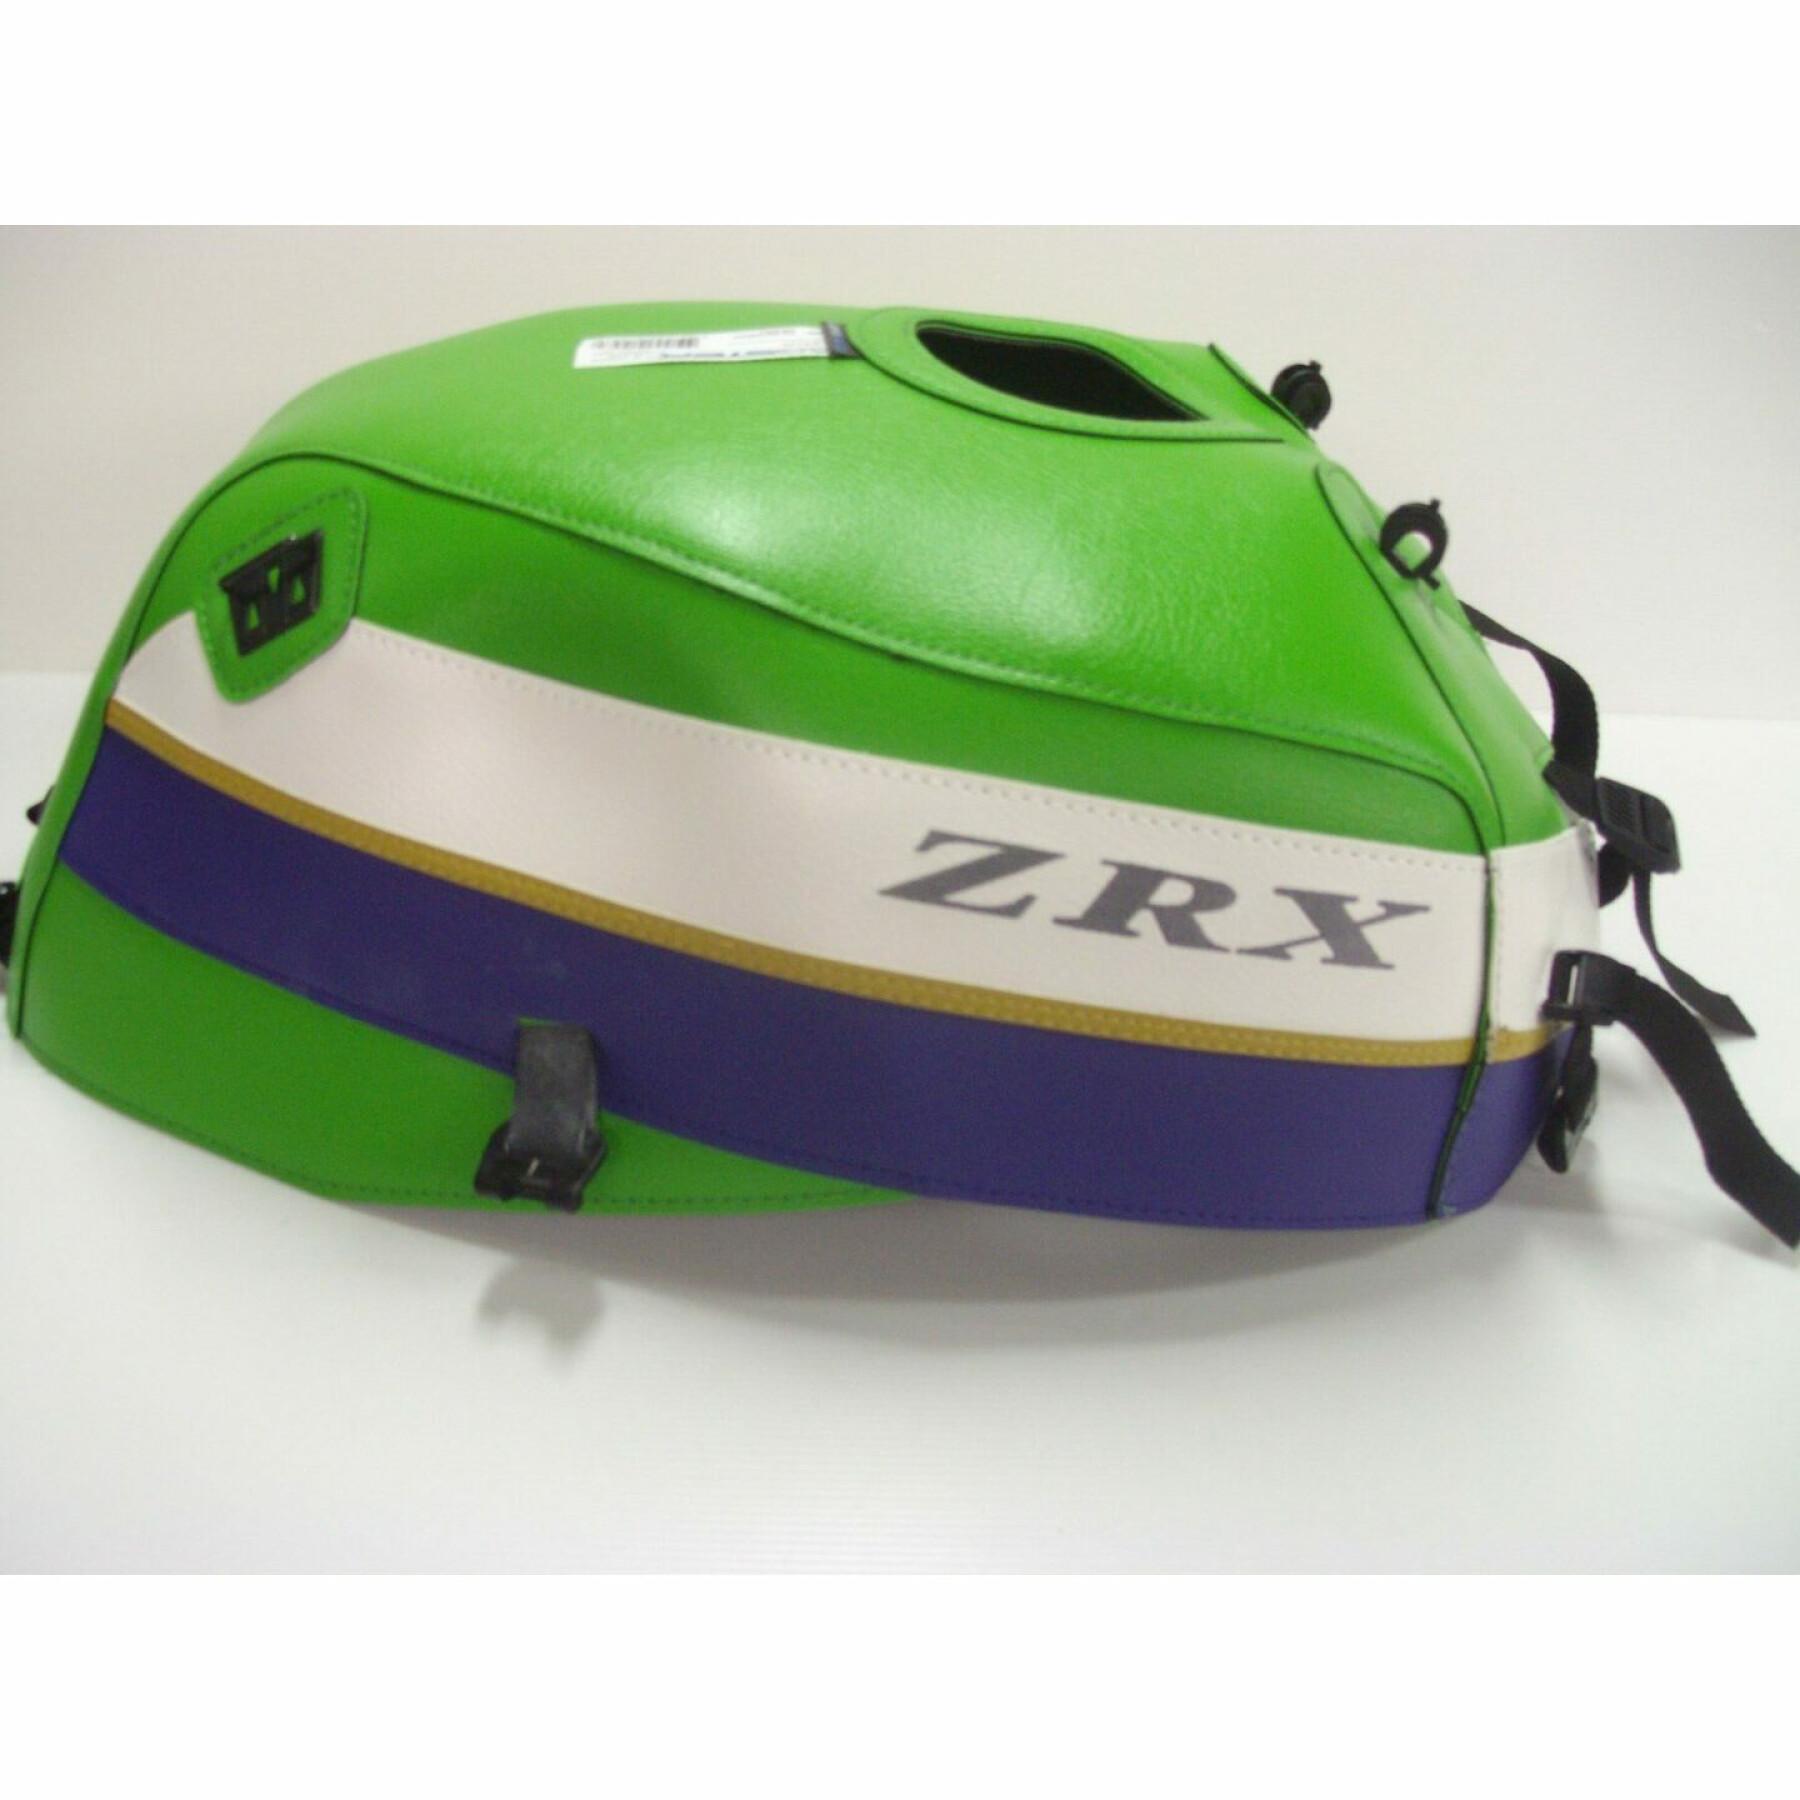 Motorcycle tank cover Bagster zrx 1100 r